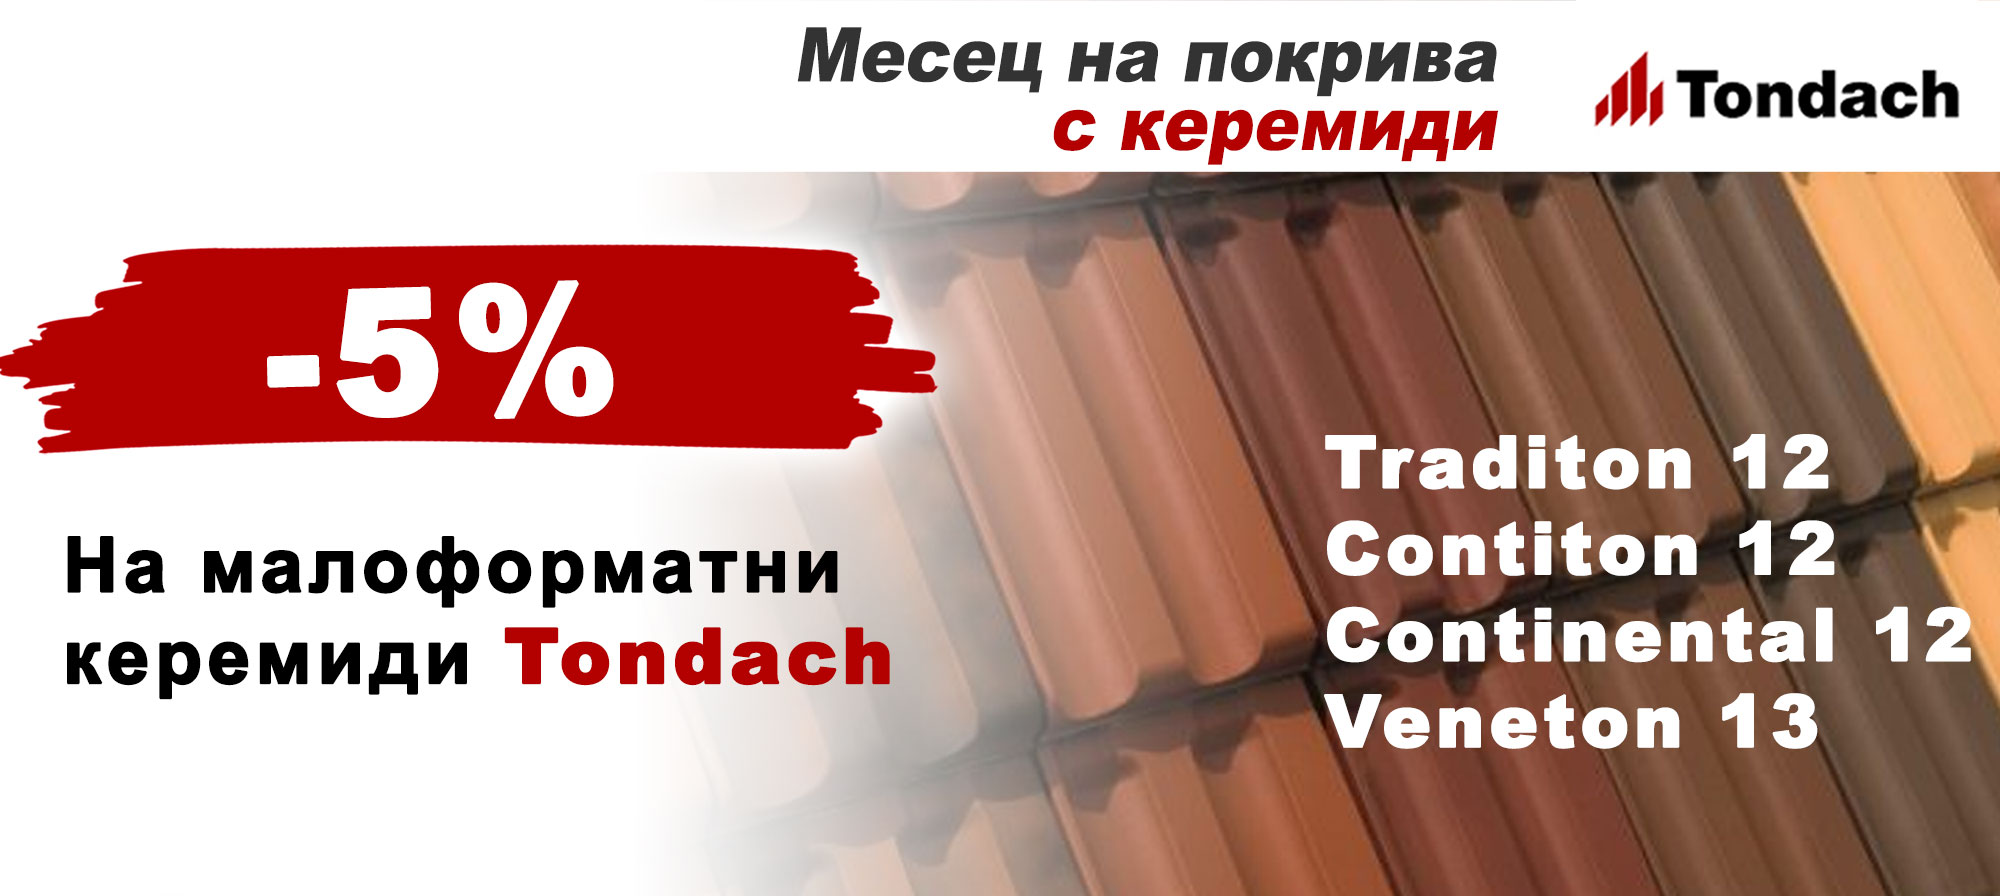 Month on the roof - tiles TONDACH with 5% discount